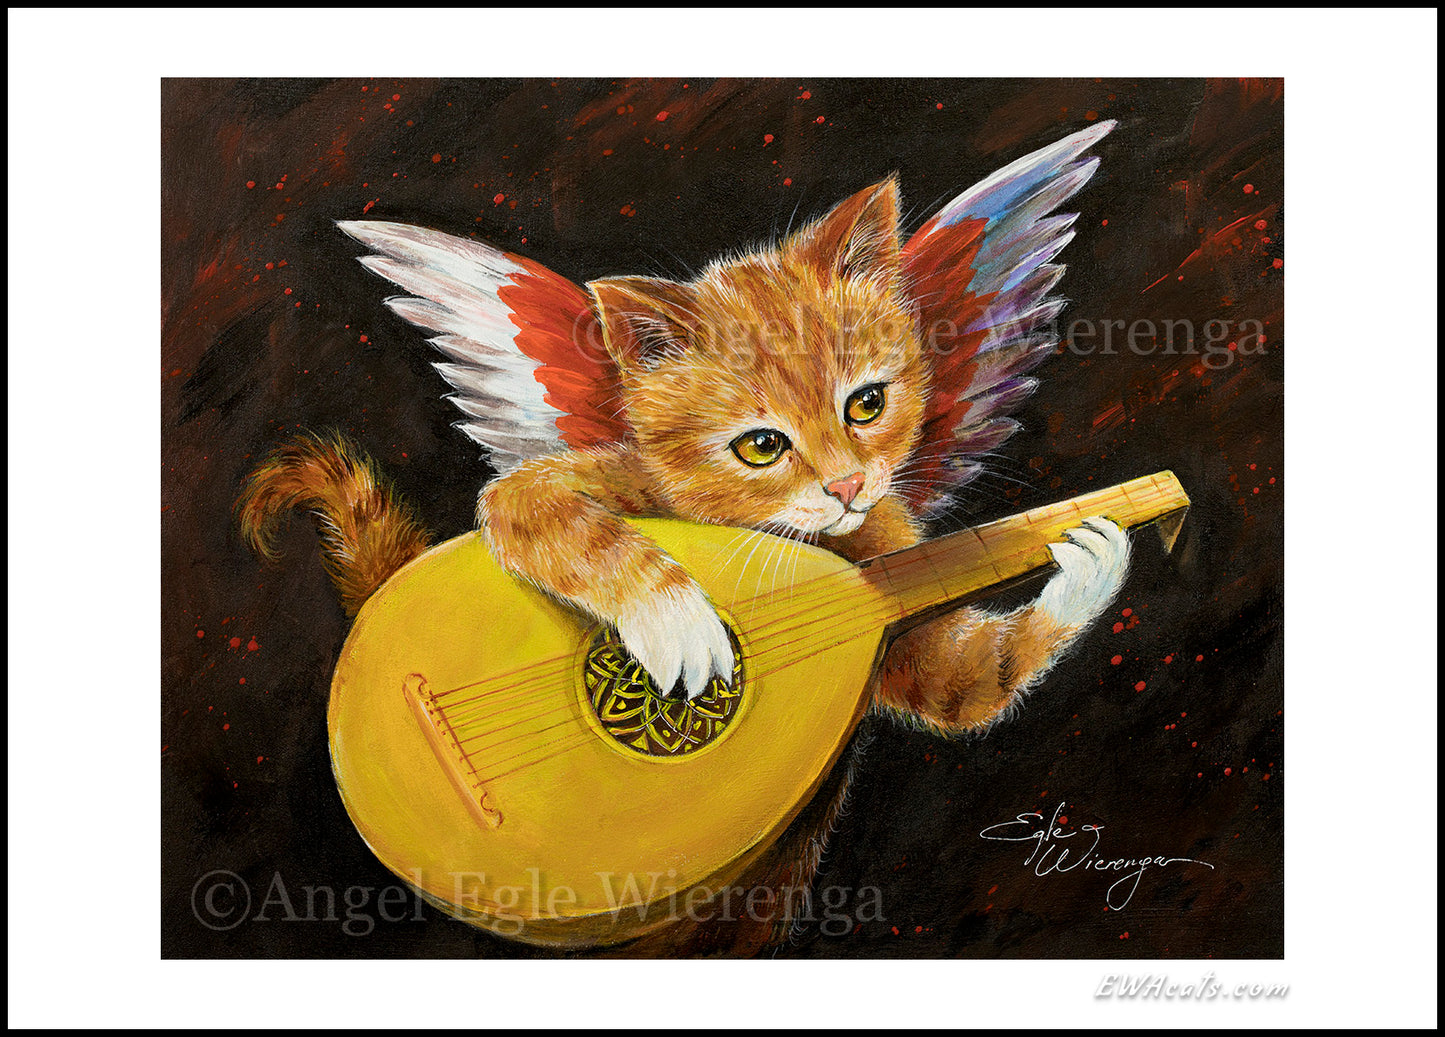 CANVAS "Angiolino Meowsicante" Open & Limited Edition